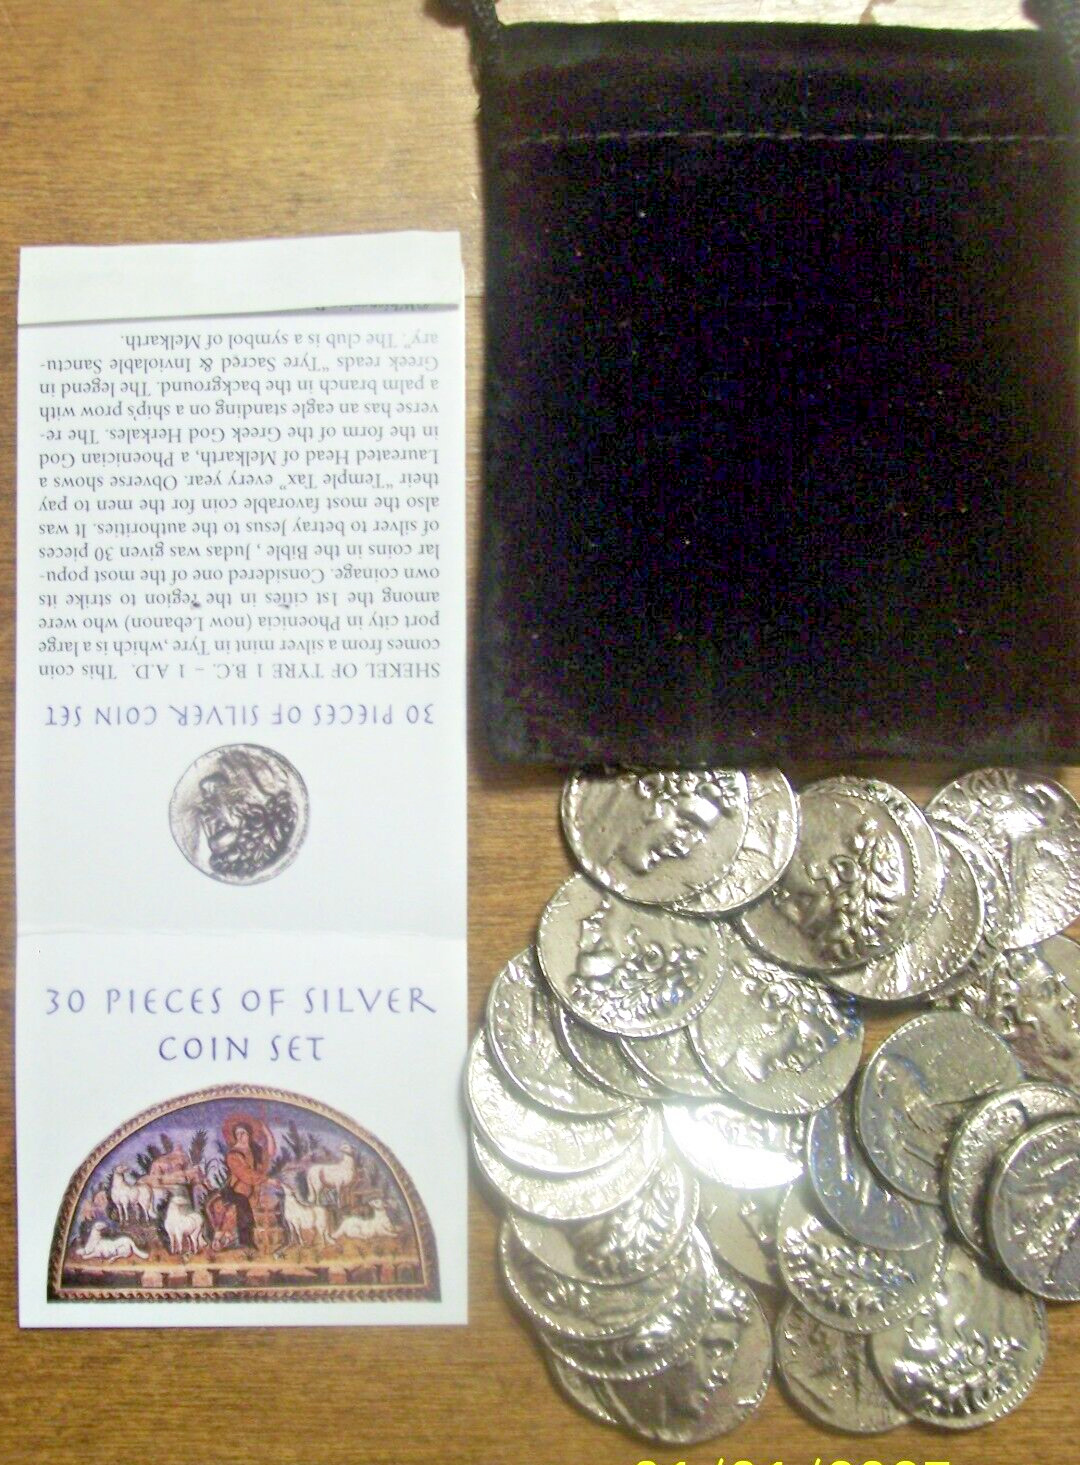 Coin Replicas 30 Pieces of Silver (not real coins) for Educational Resource